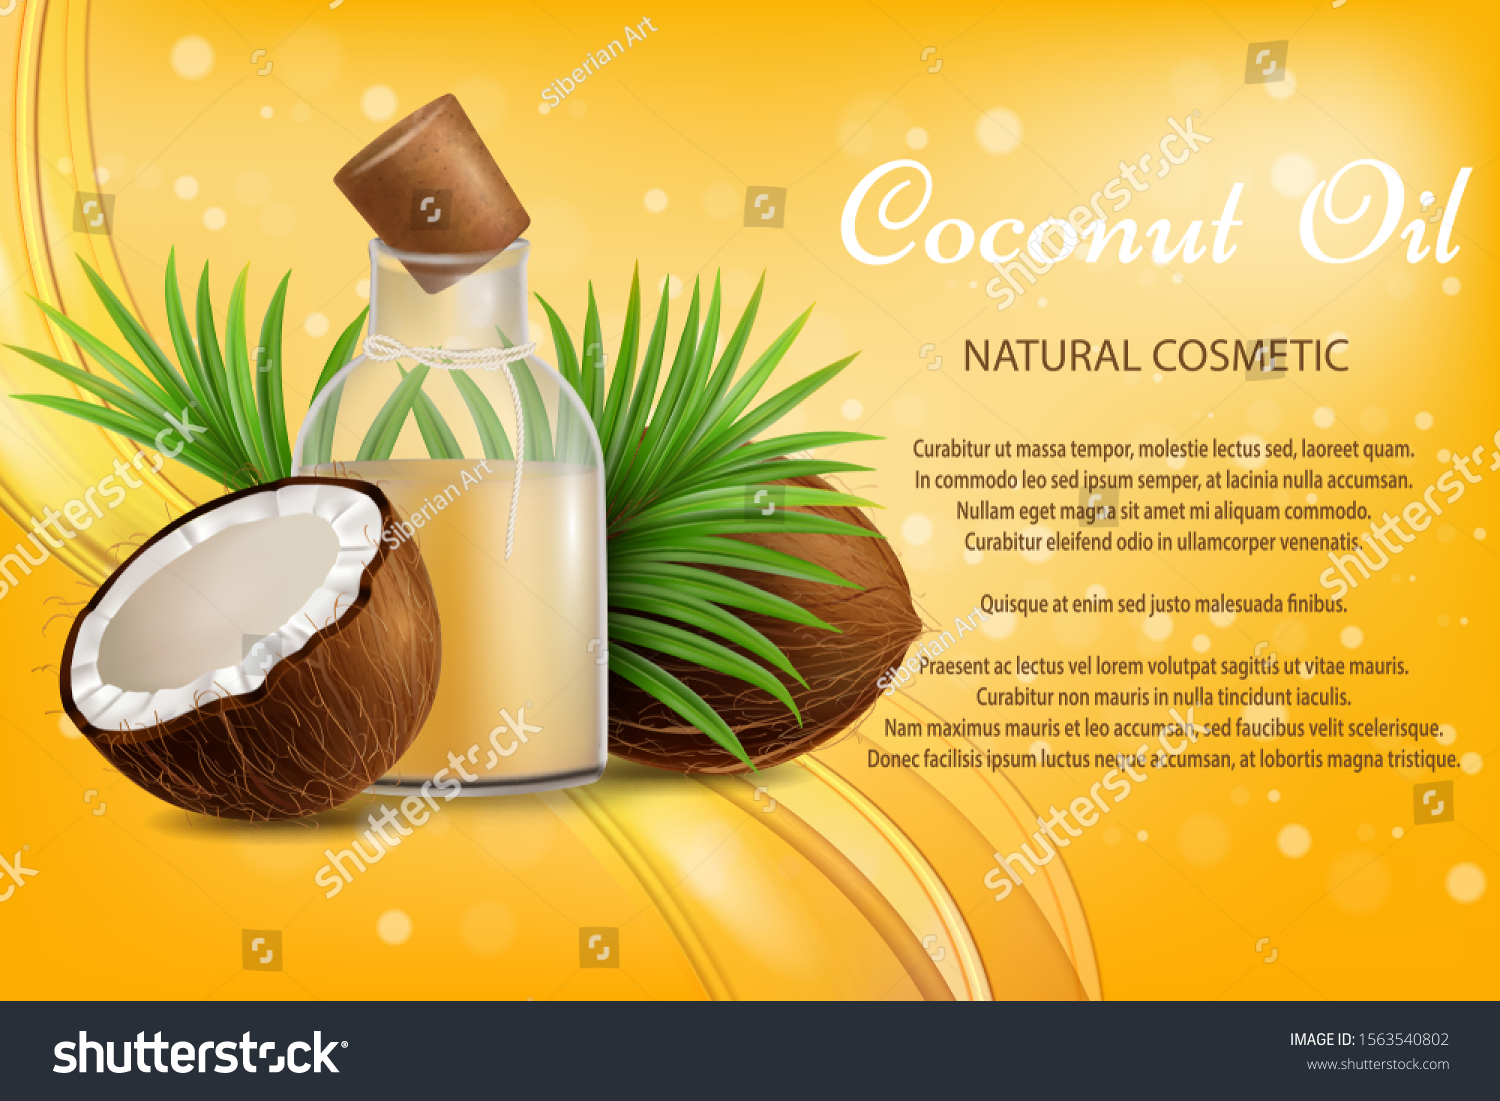 Coconut oil natural cosmetic, vector poster template. Realistic whole and half coco, oil bottle, palm leaves. Organic coconut oil beauty product brand advertising composition with text. #1563540802